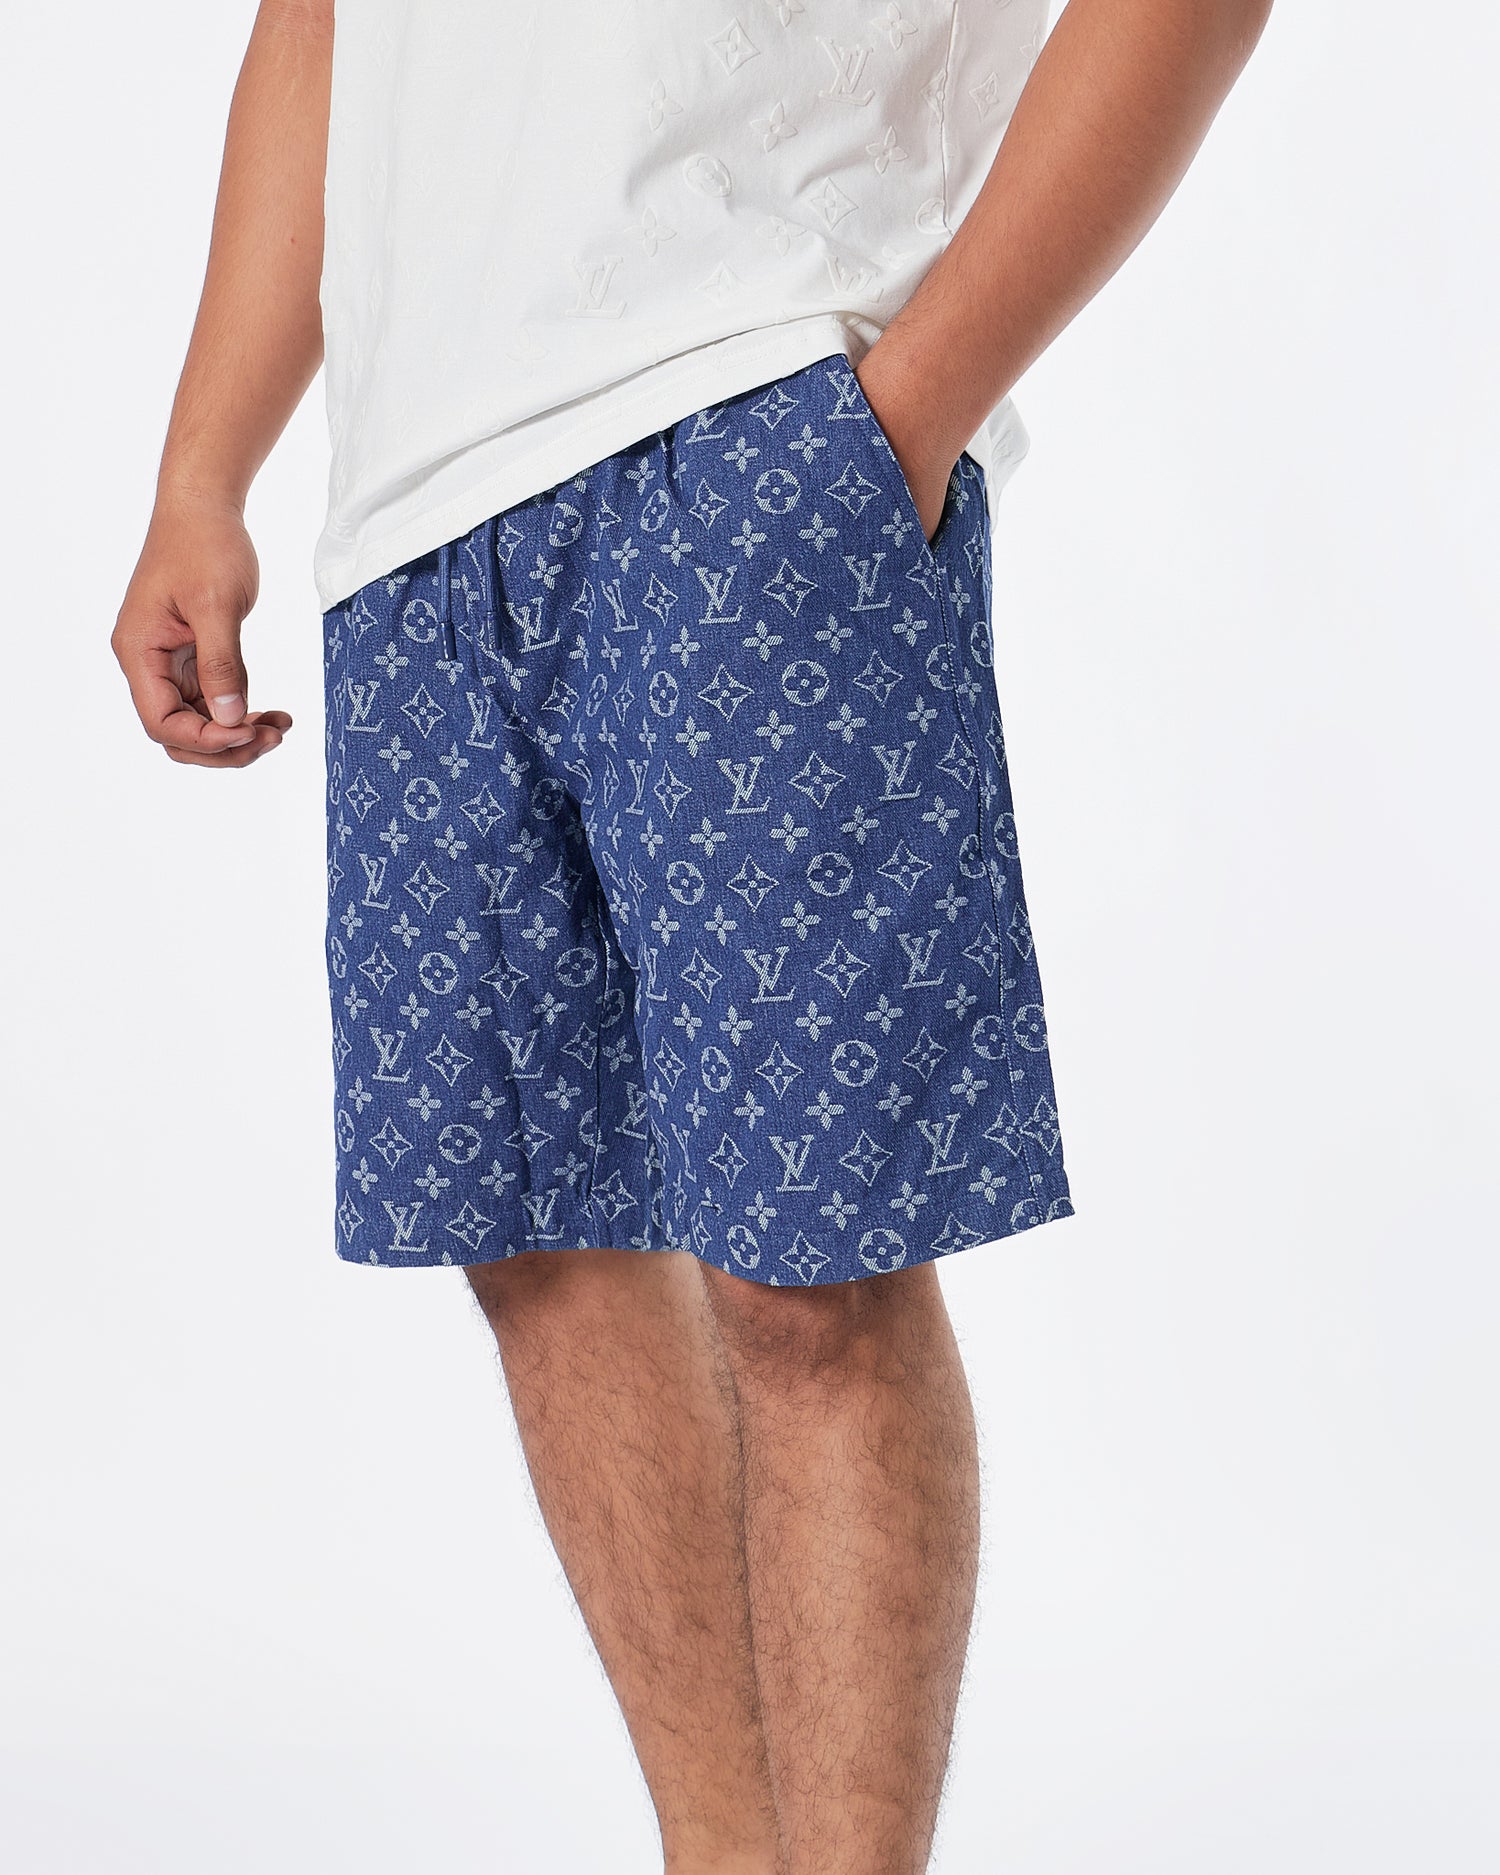 Louis Vuitton Monogram Mens Shorts, Blue, L*Inventory Confirmation Required